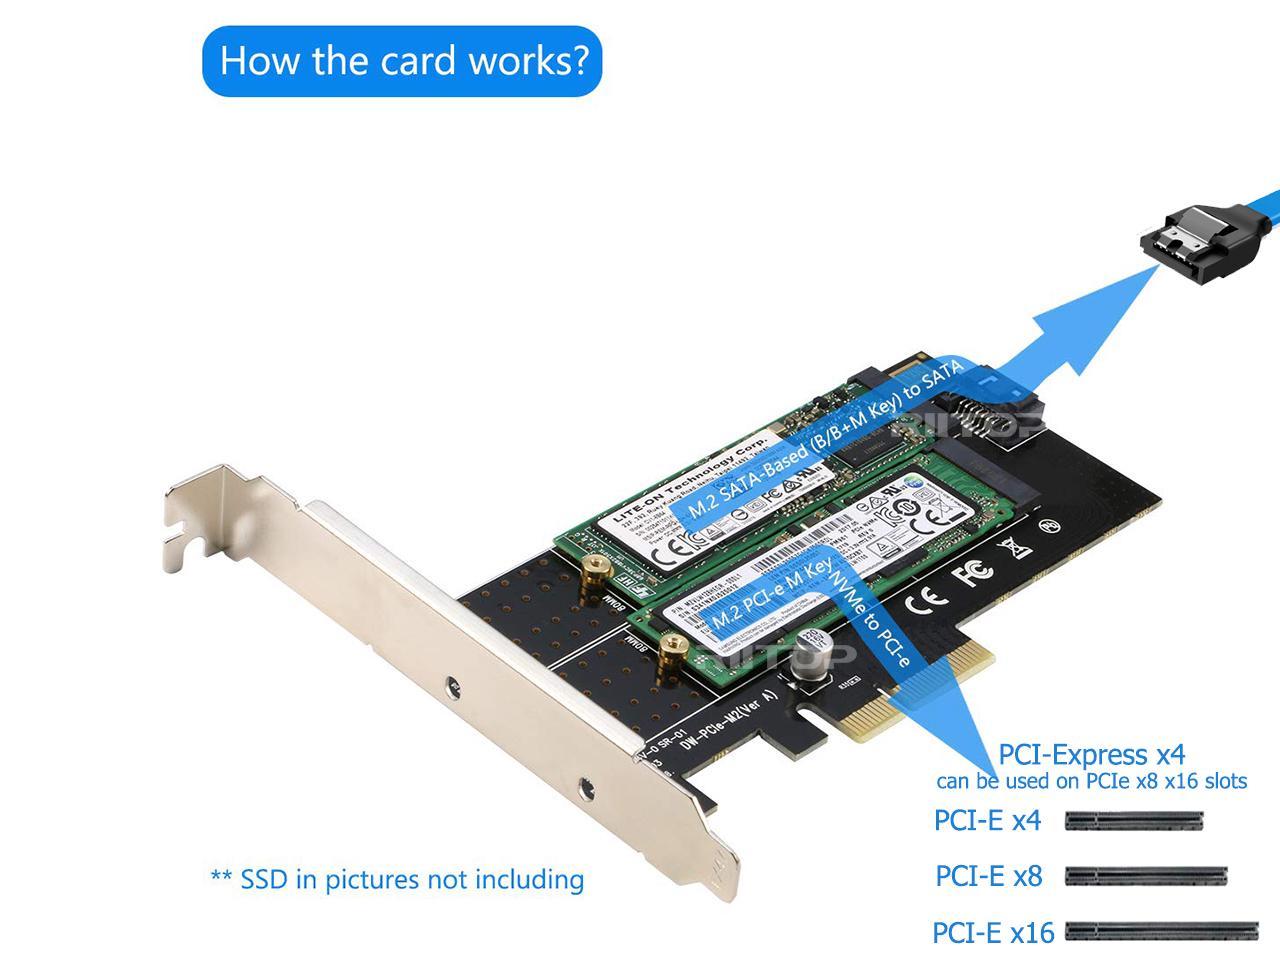 Zopsc-1 Universal PCI‑E 3.0 x4 to M.2 NGFF SSD Adapter Card Hard Drive NGFF Host Controller Expansion Adapter M Key Interface Card Support PCI Express 3.0 x 4 